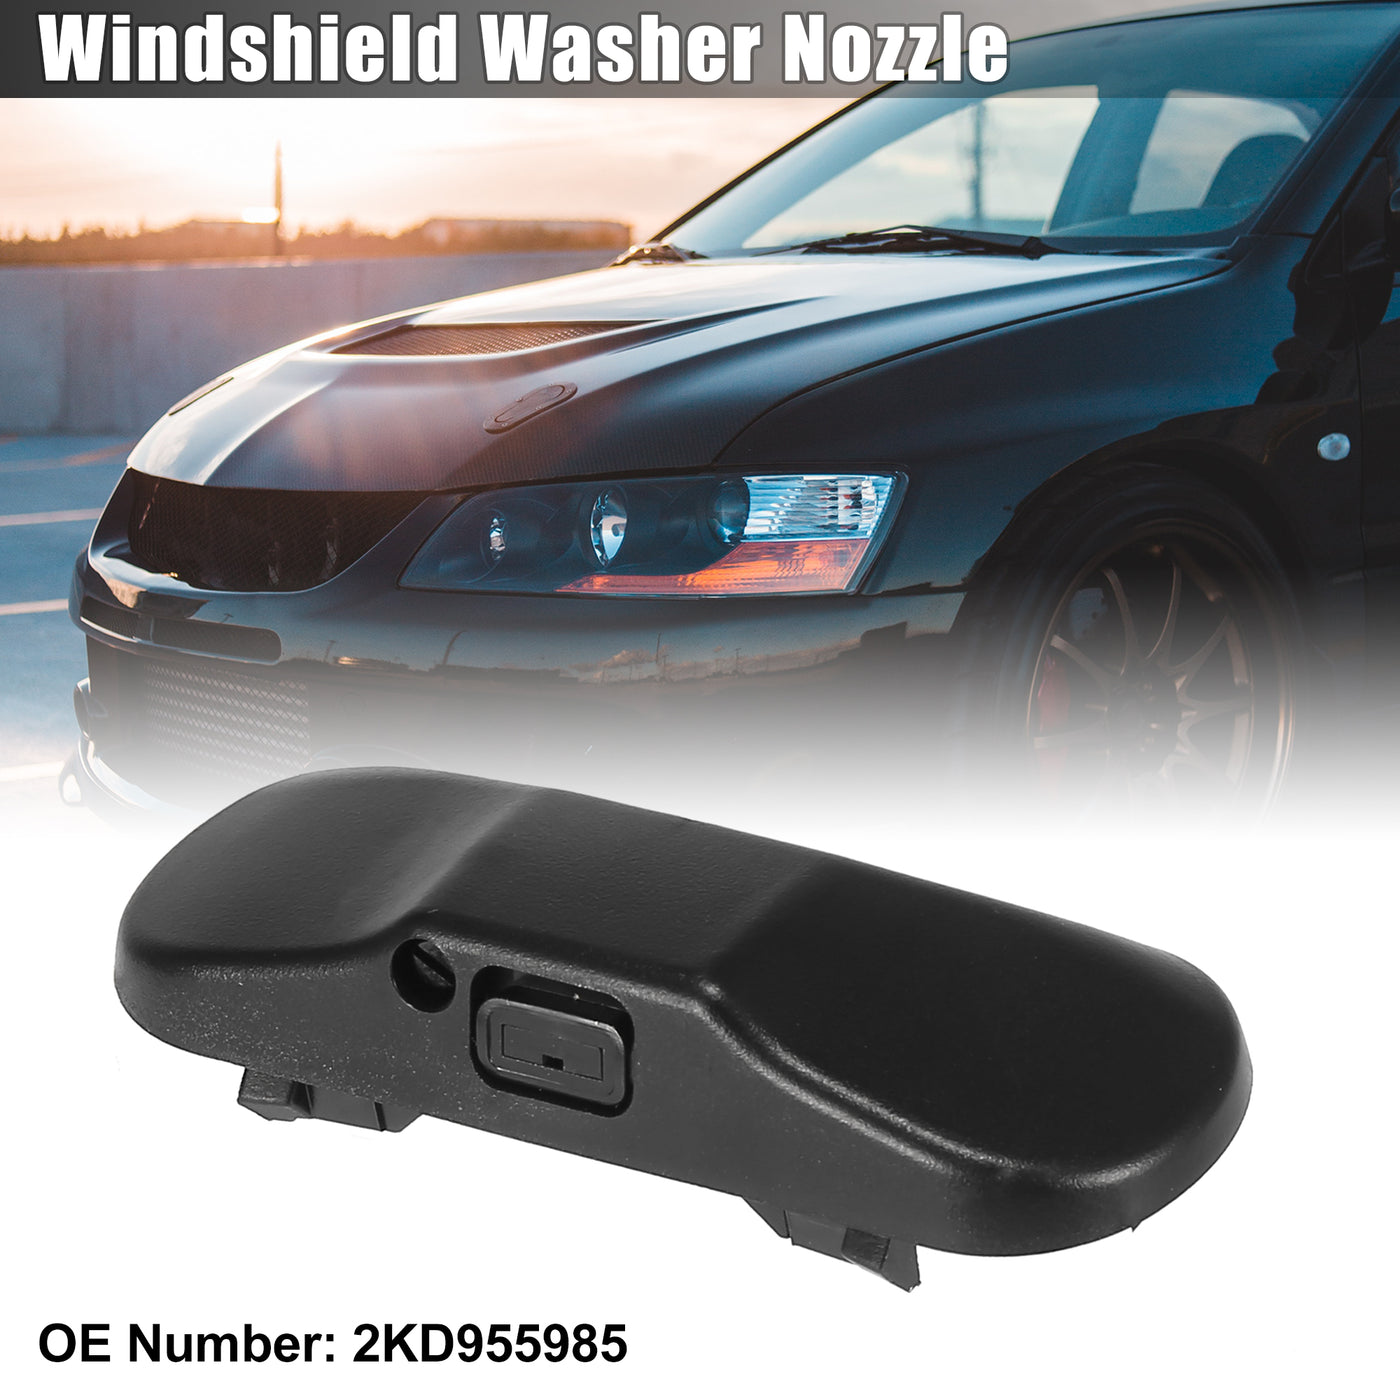 X AUTOHAUX Windshield Washer Nozzles Spray Jet Left or Right 2KD955985 for VW Tiguan MK1 2007-2015 for VW Golf Plus 2005-2013